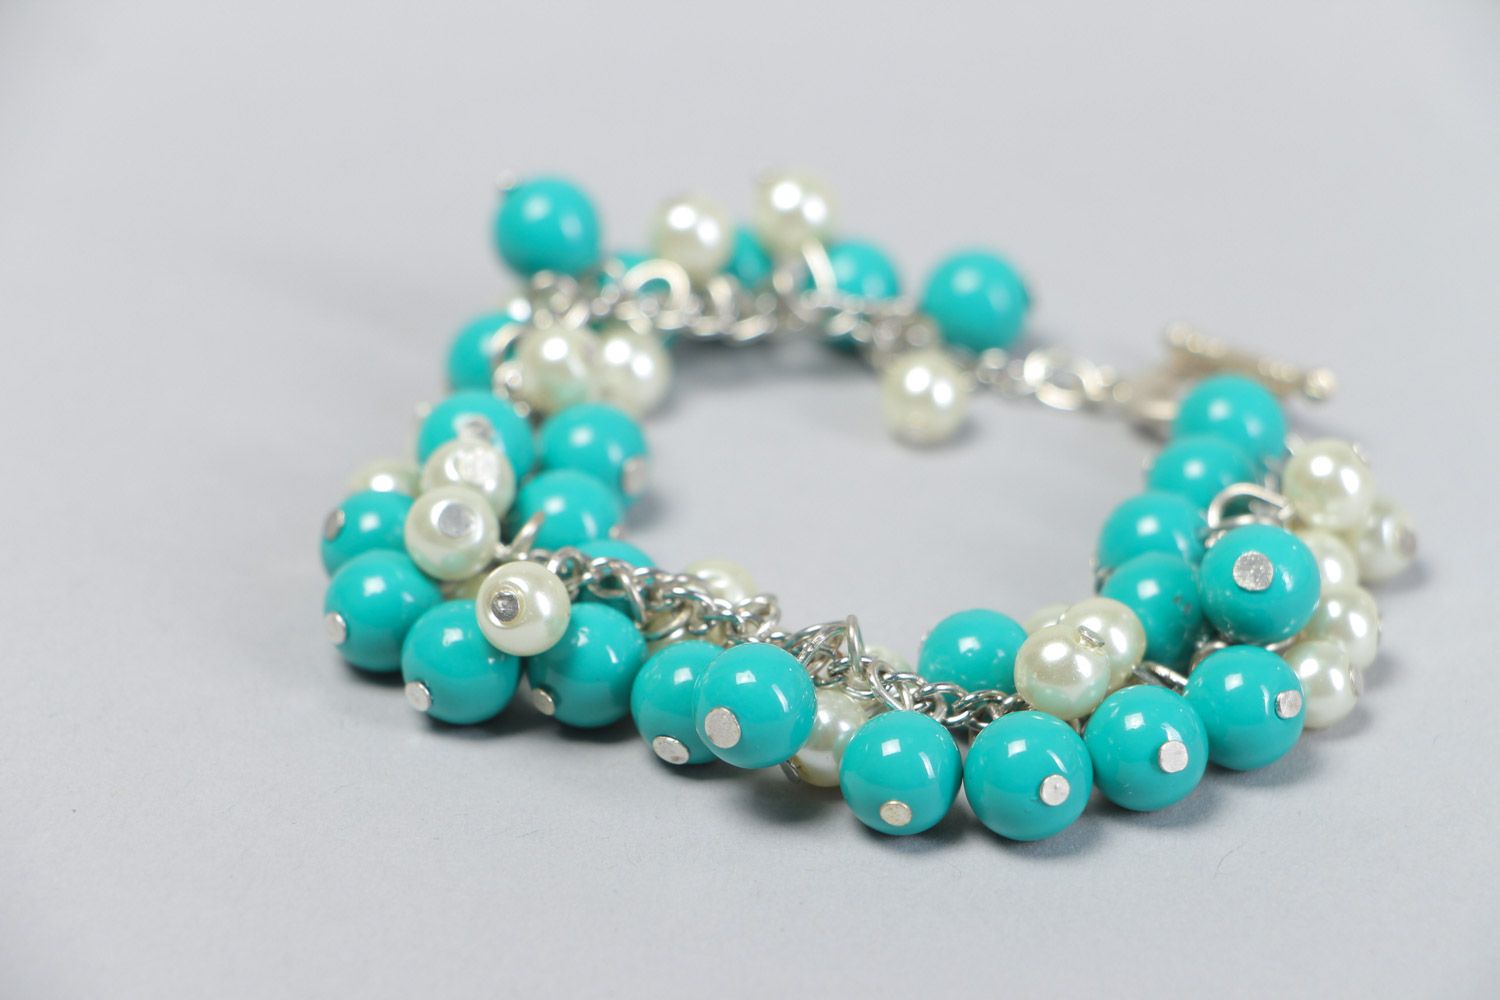 Handmade bright stylish beaded wrist bracelet with charms of turquoise and white colors photo 3